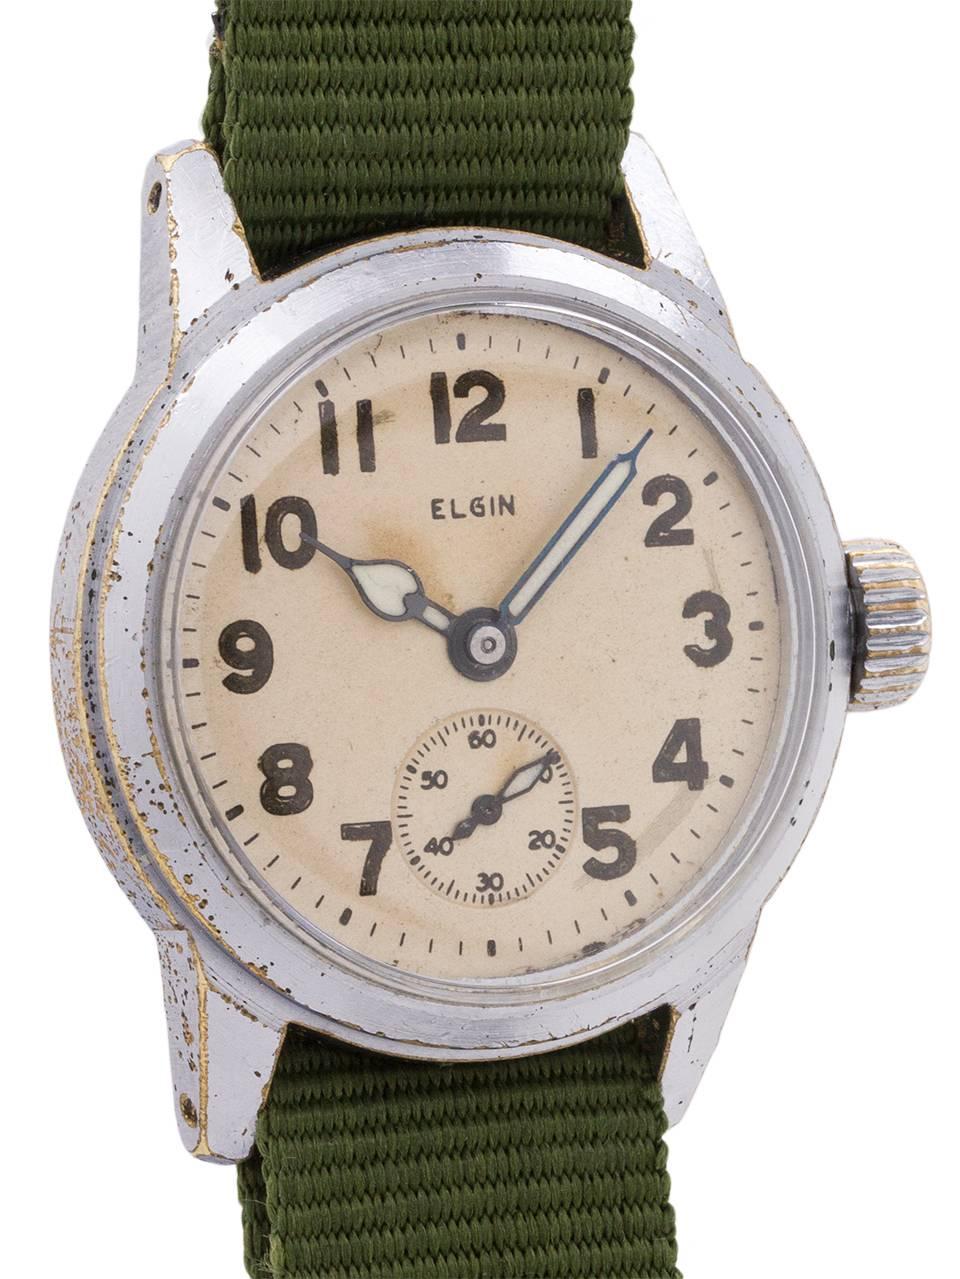 
A popular vintage Elgin military issue model circa WWII. Medium size 32mm diameter base metal case, with stainless steel screw down caseback with U.S. ordinance engraving. Chromium plated bezel shows wear consistent with use in the military. With